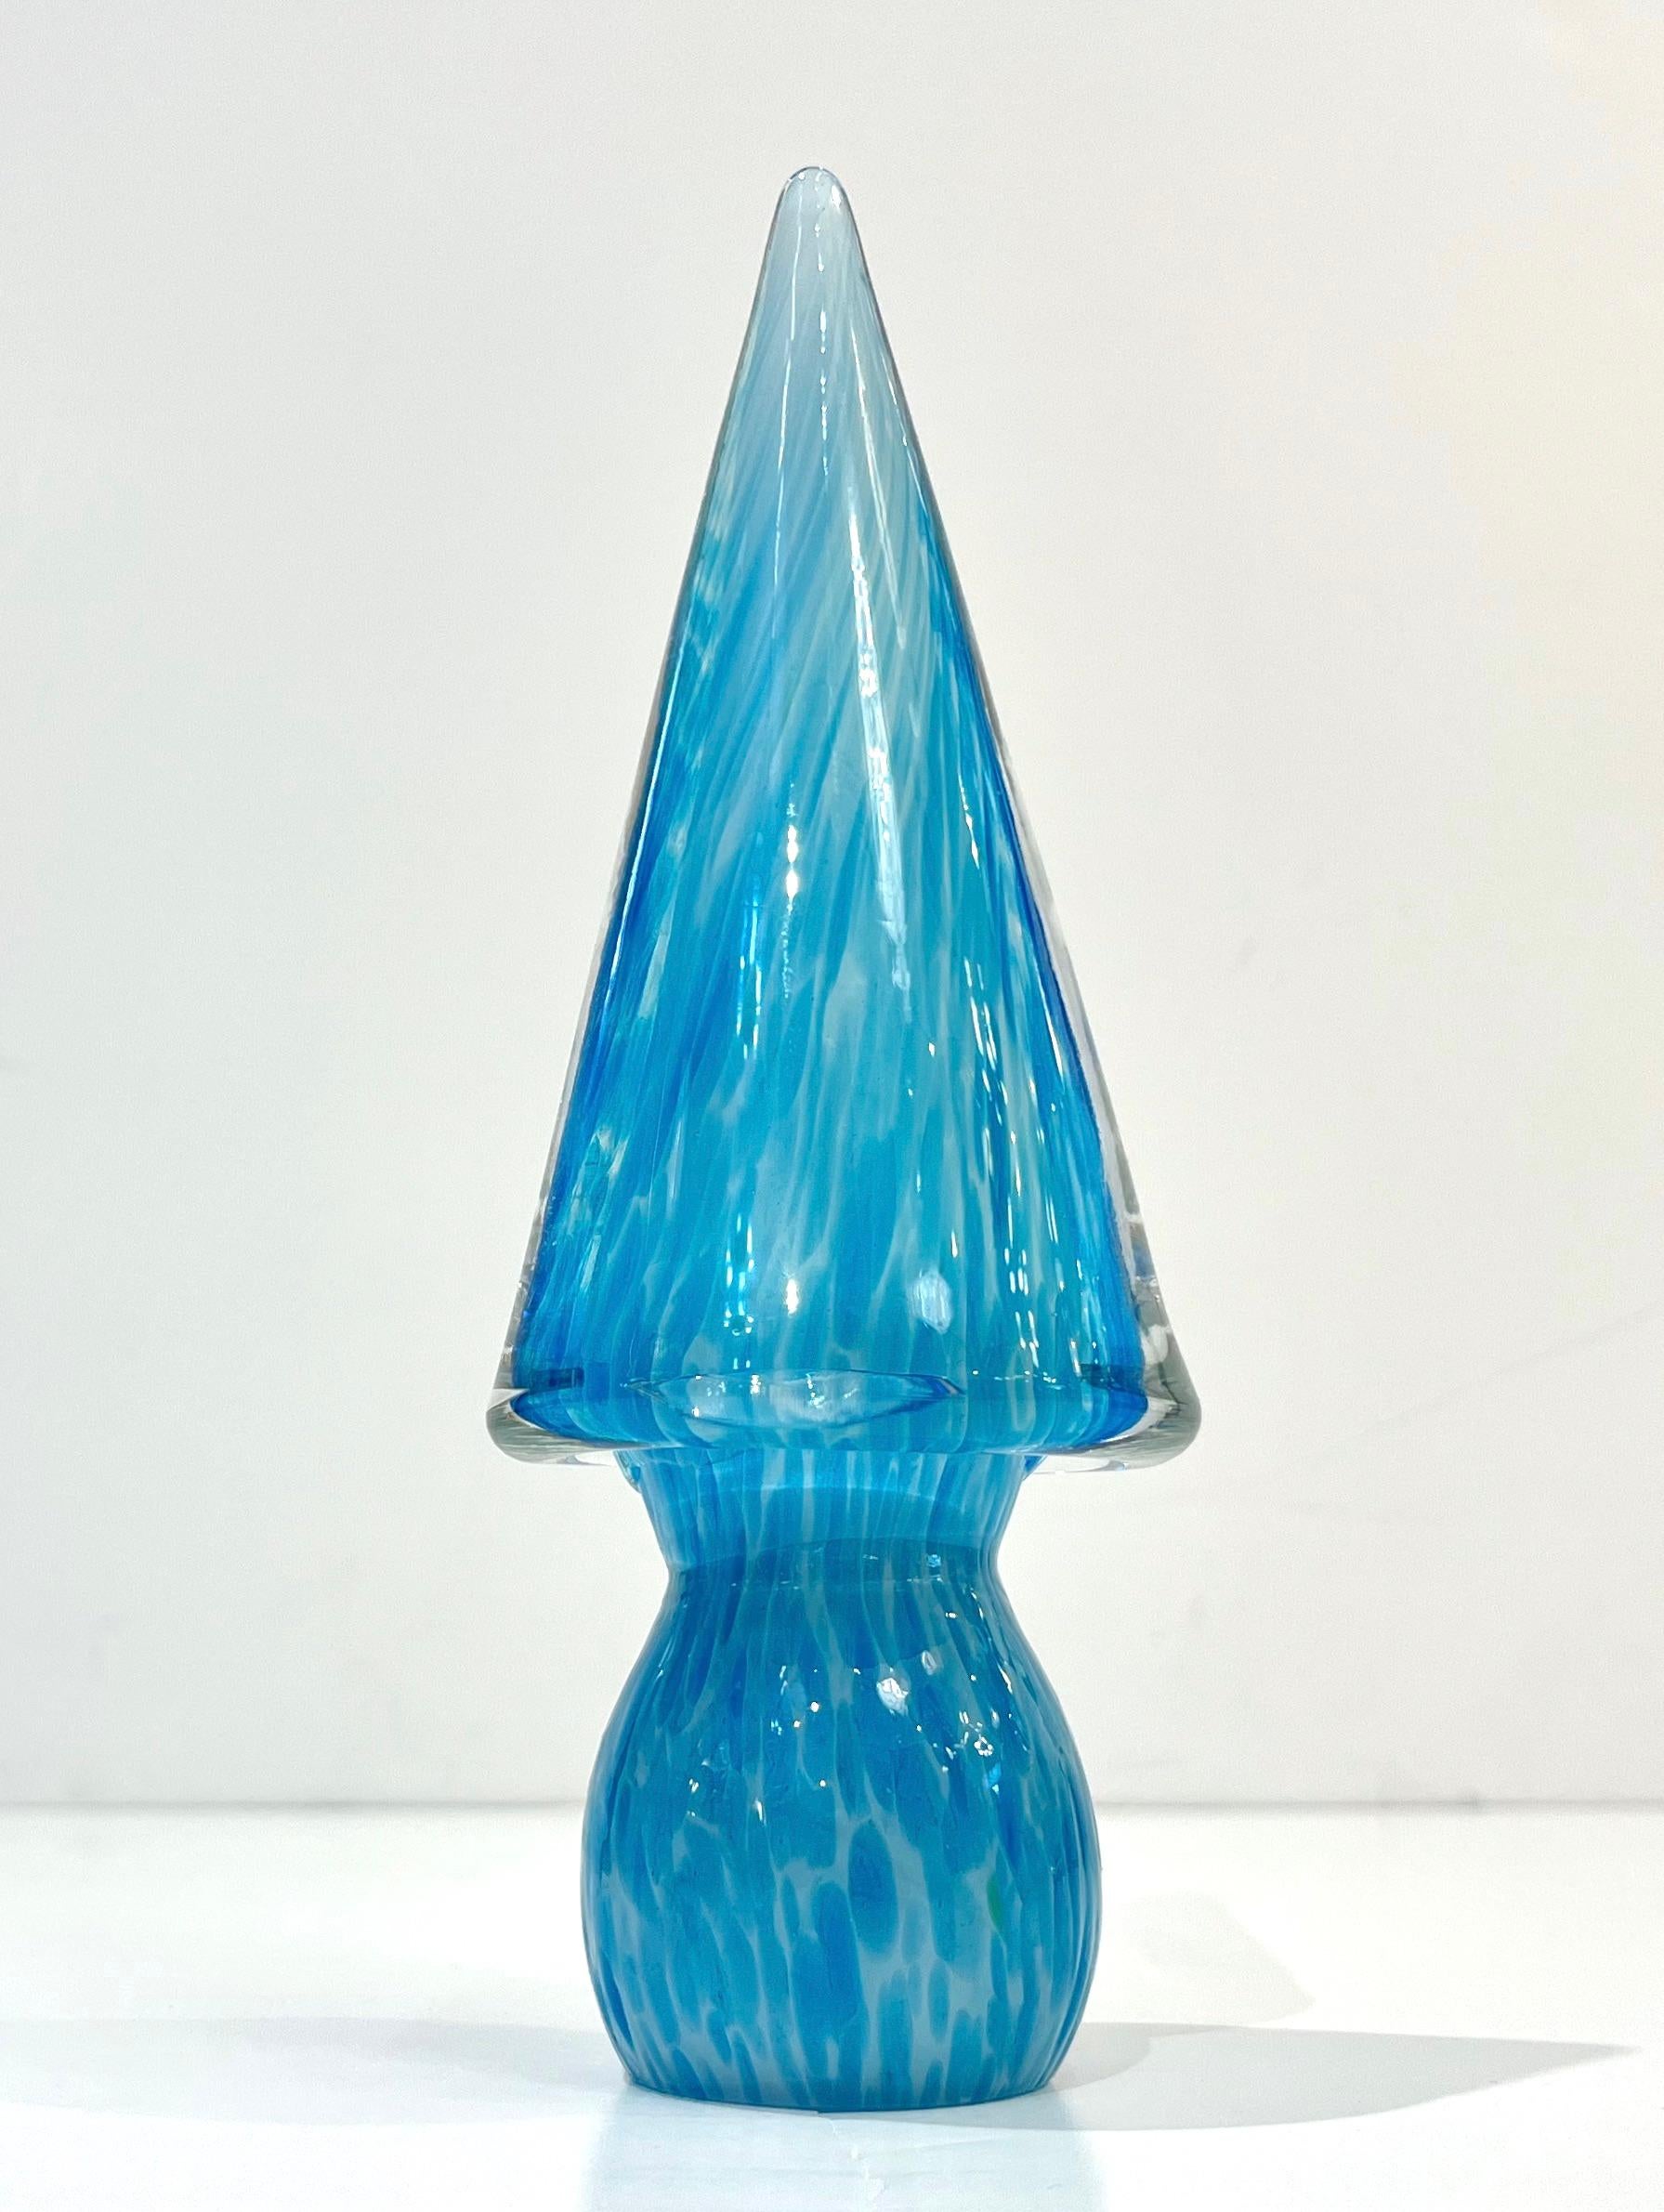 Christmas tree sculpture of organic sleek Minimalist cone design, in mouth-blown solid Murano glass, entirely handcrafted, a vintage Venetian creation. This piece comes from a private collection of different colored glass trees by Formia, some